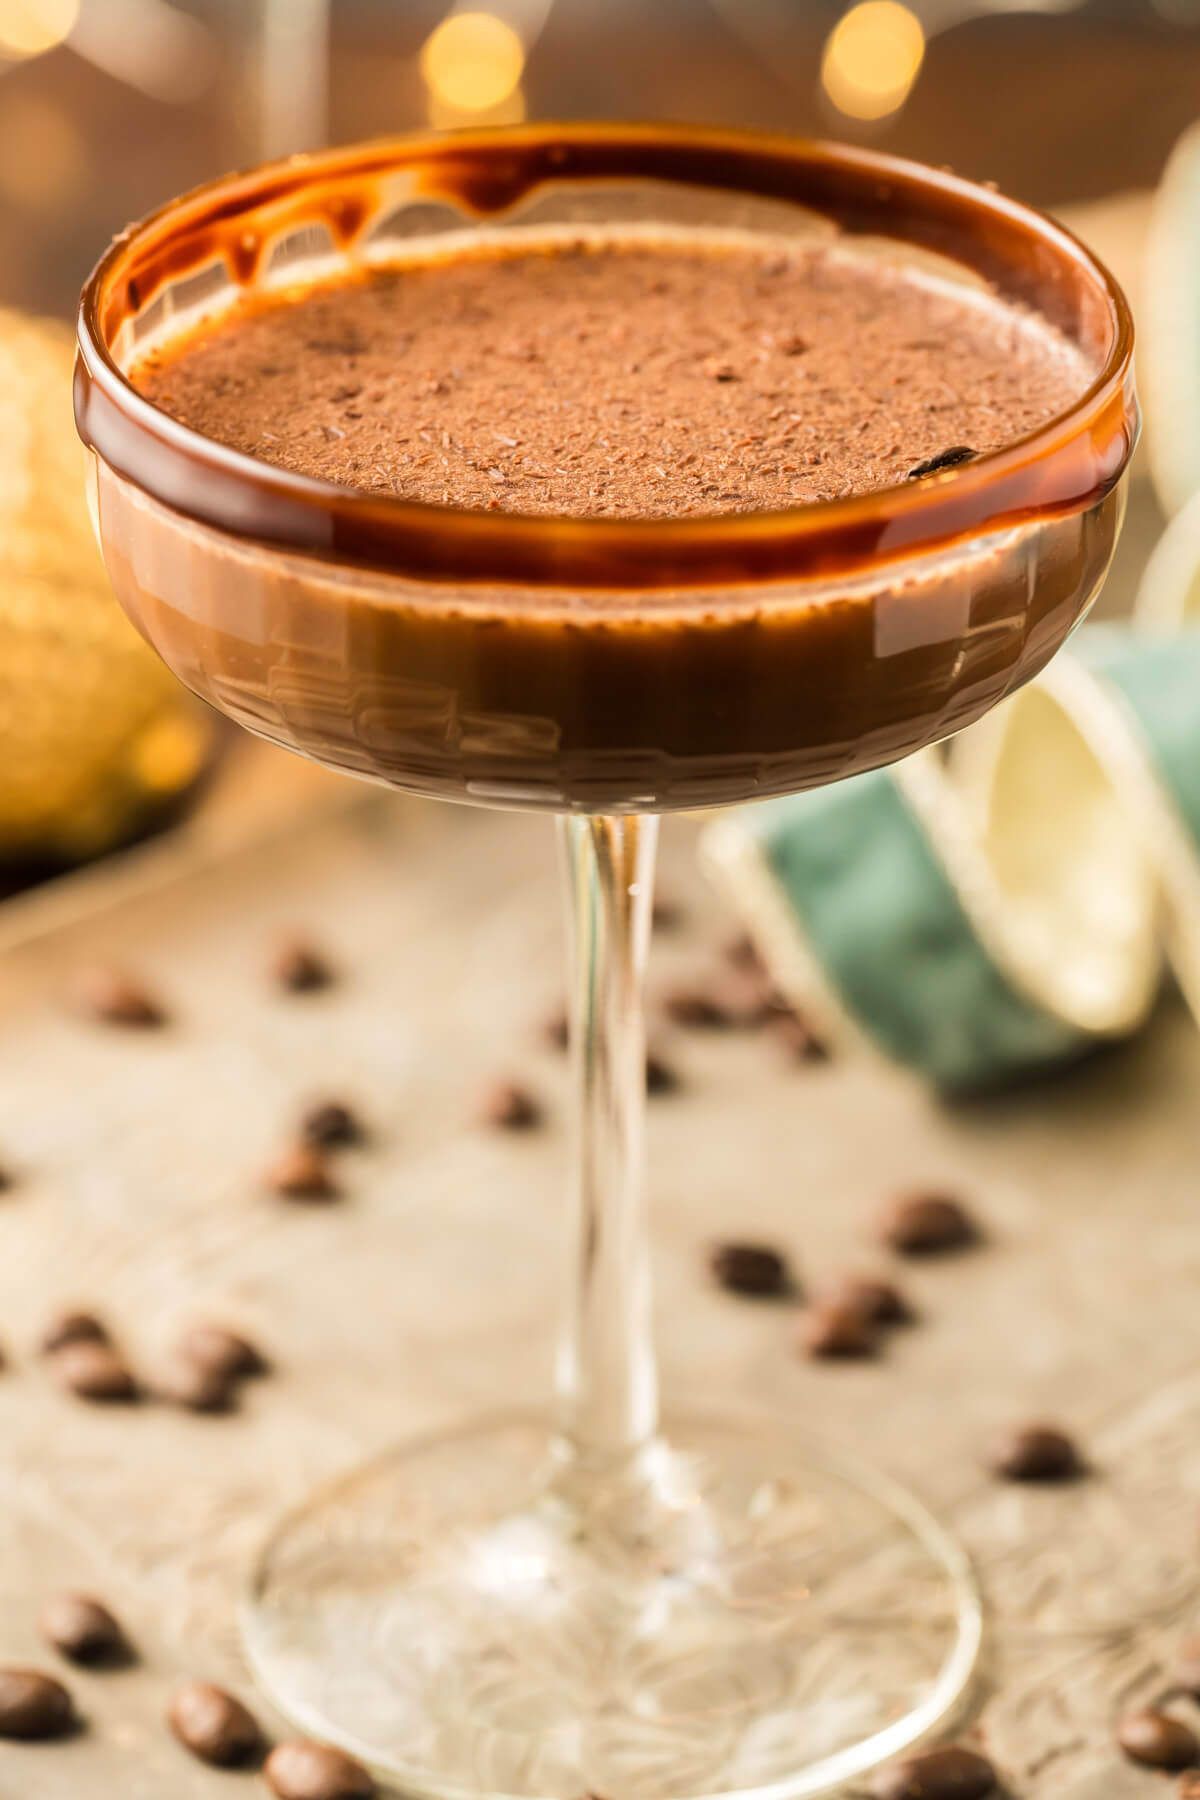 One creamy brown Chocolate Espresso Martini in a coupe cocktail glass garnished with chocolate rim and chocolate shavings.